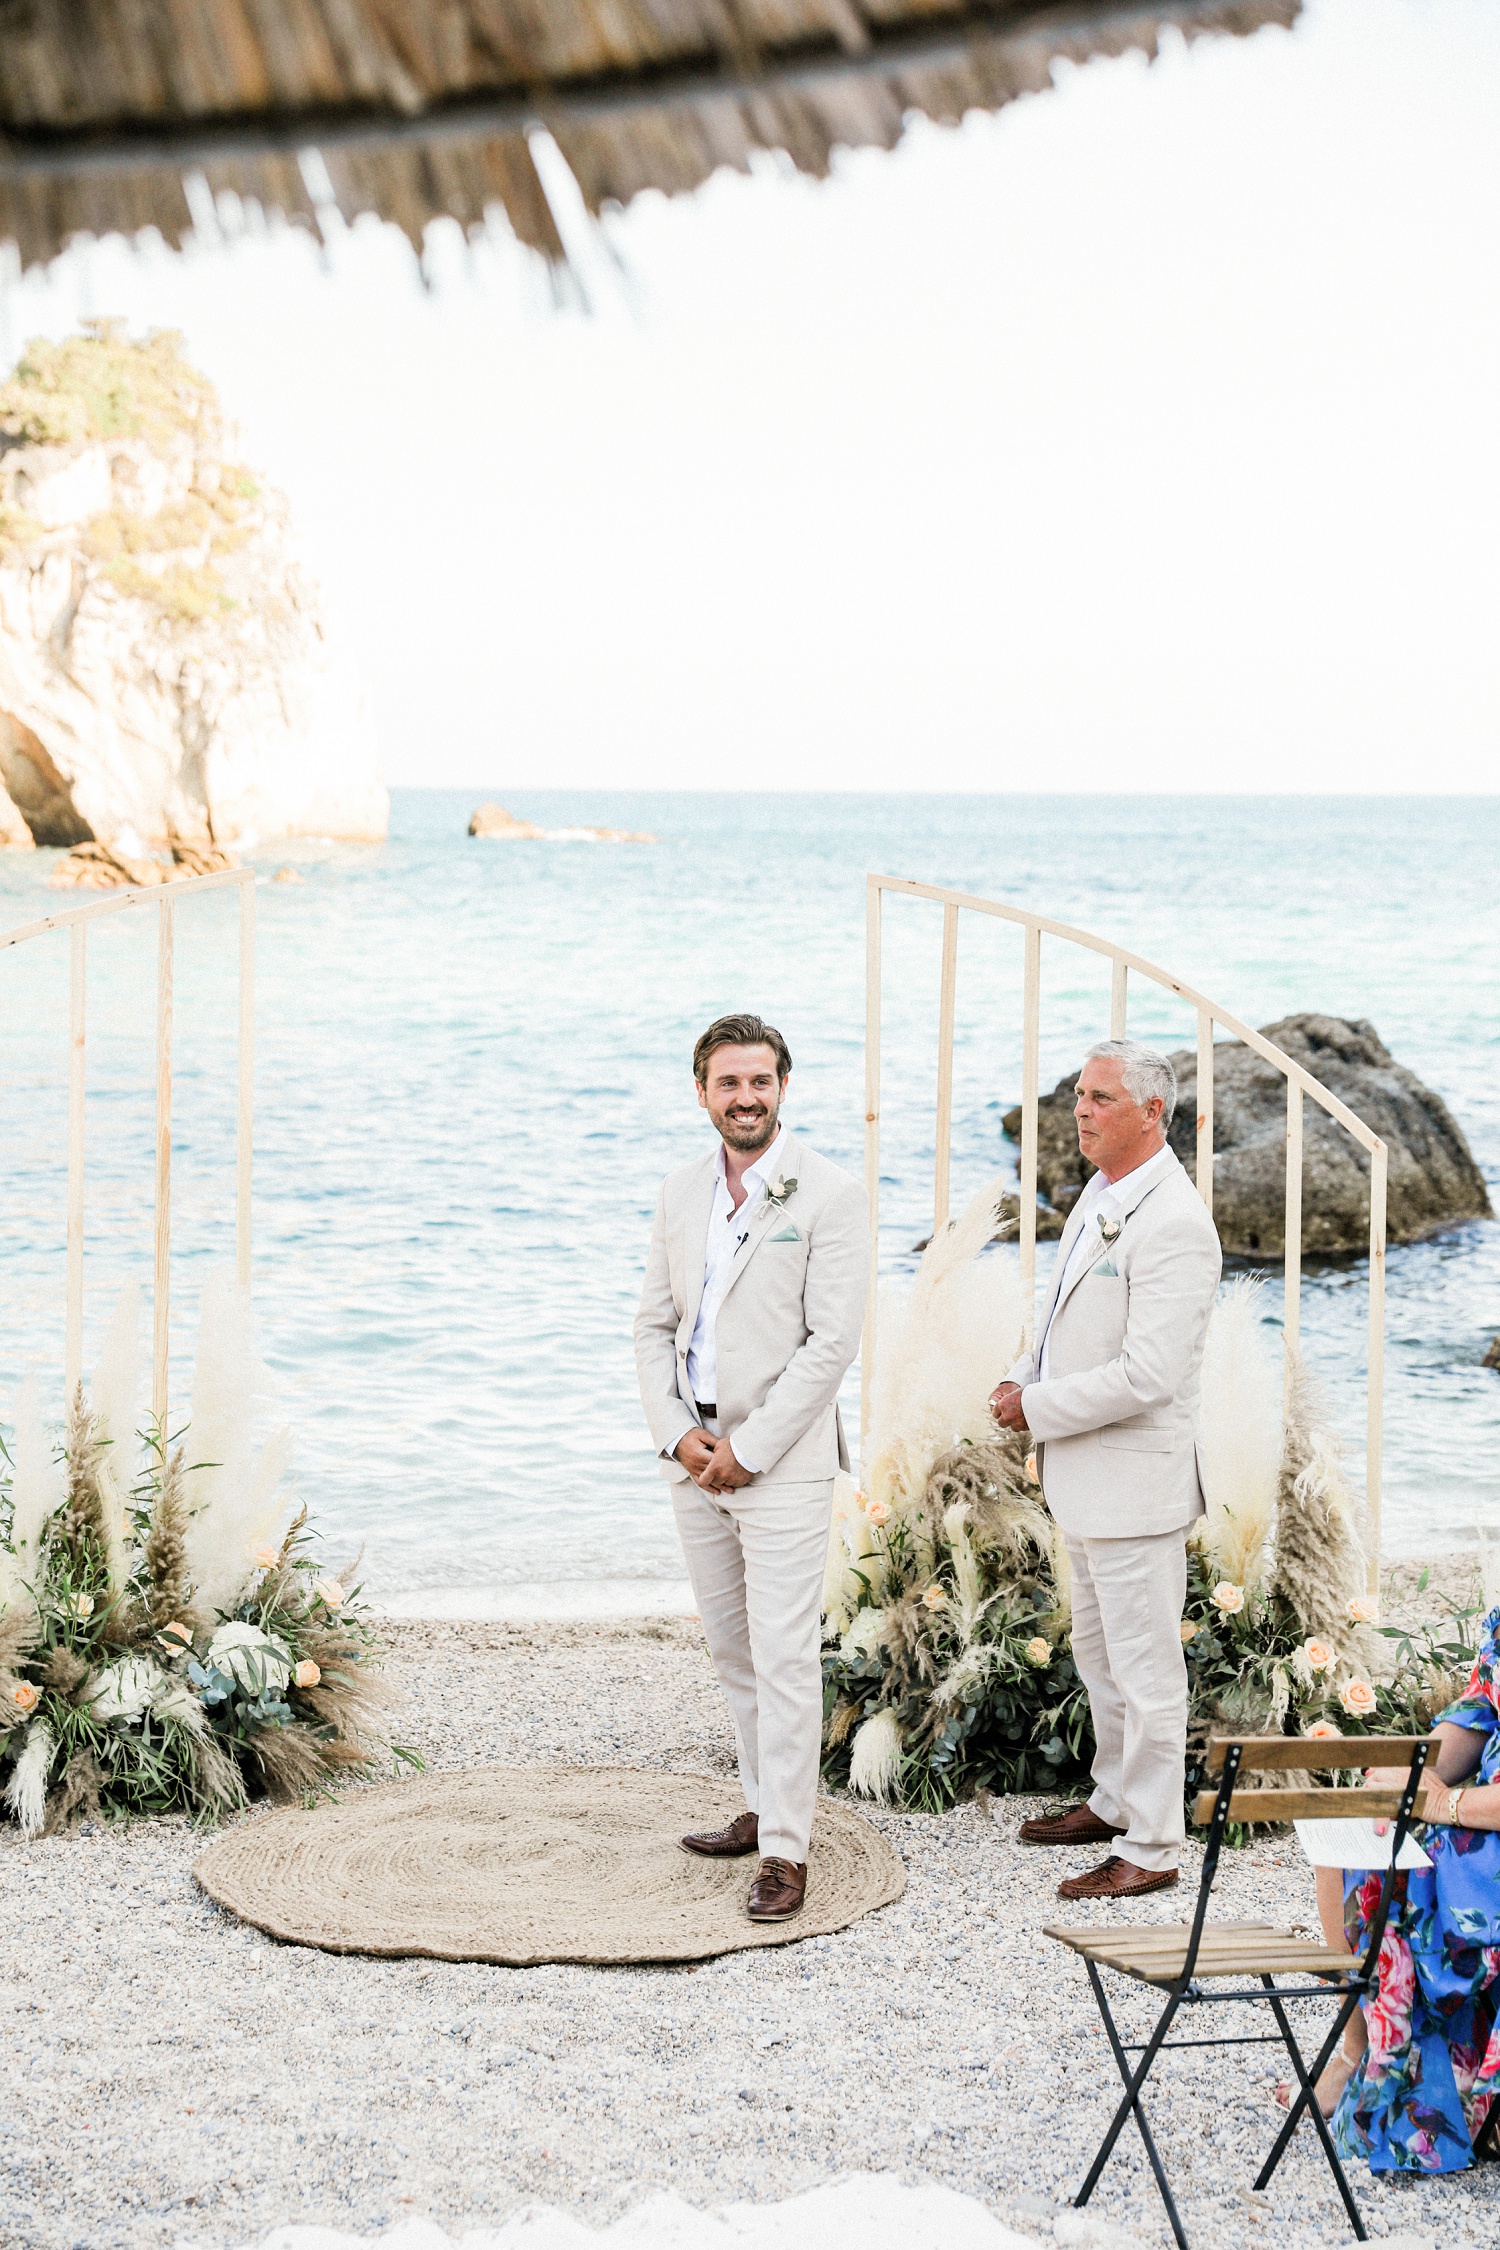 Groom standing in front of a boho wedding arch smiles as he sees his bride arrive